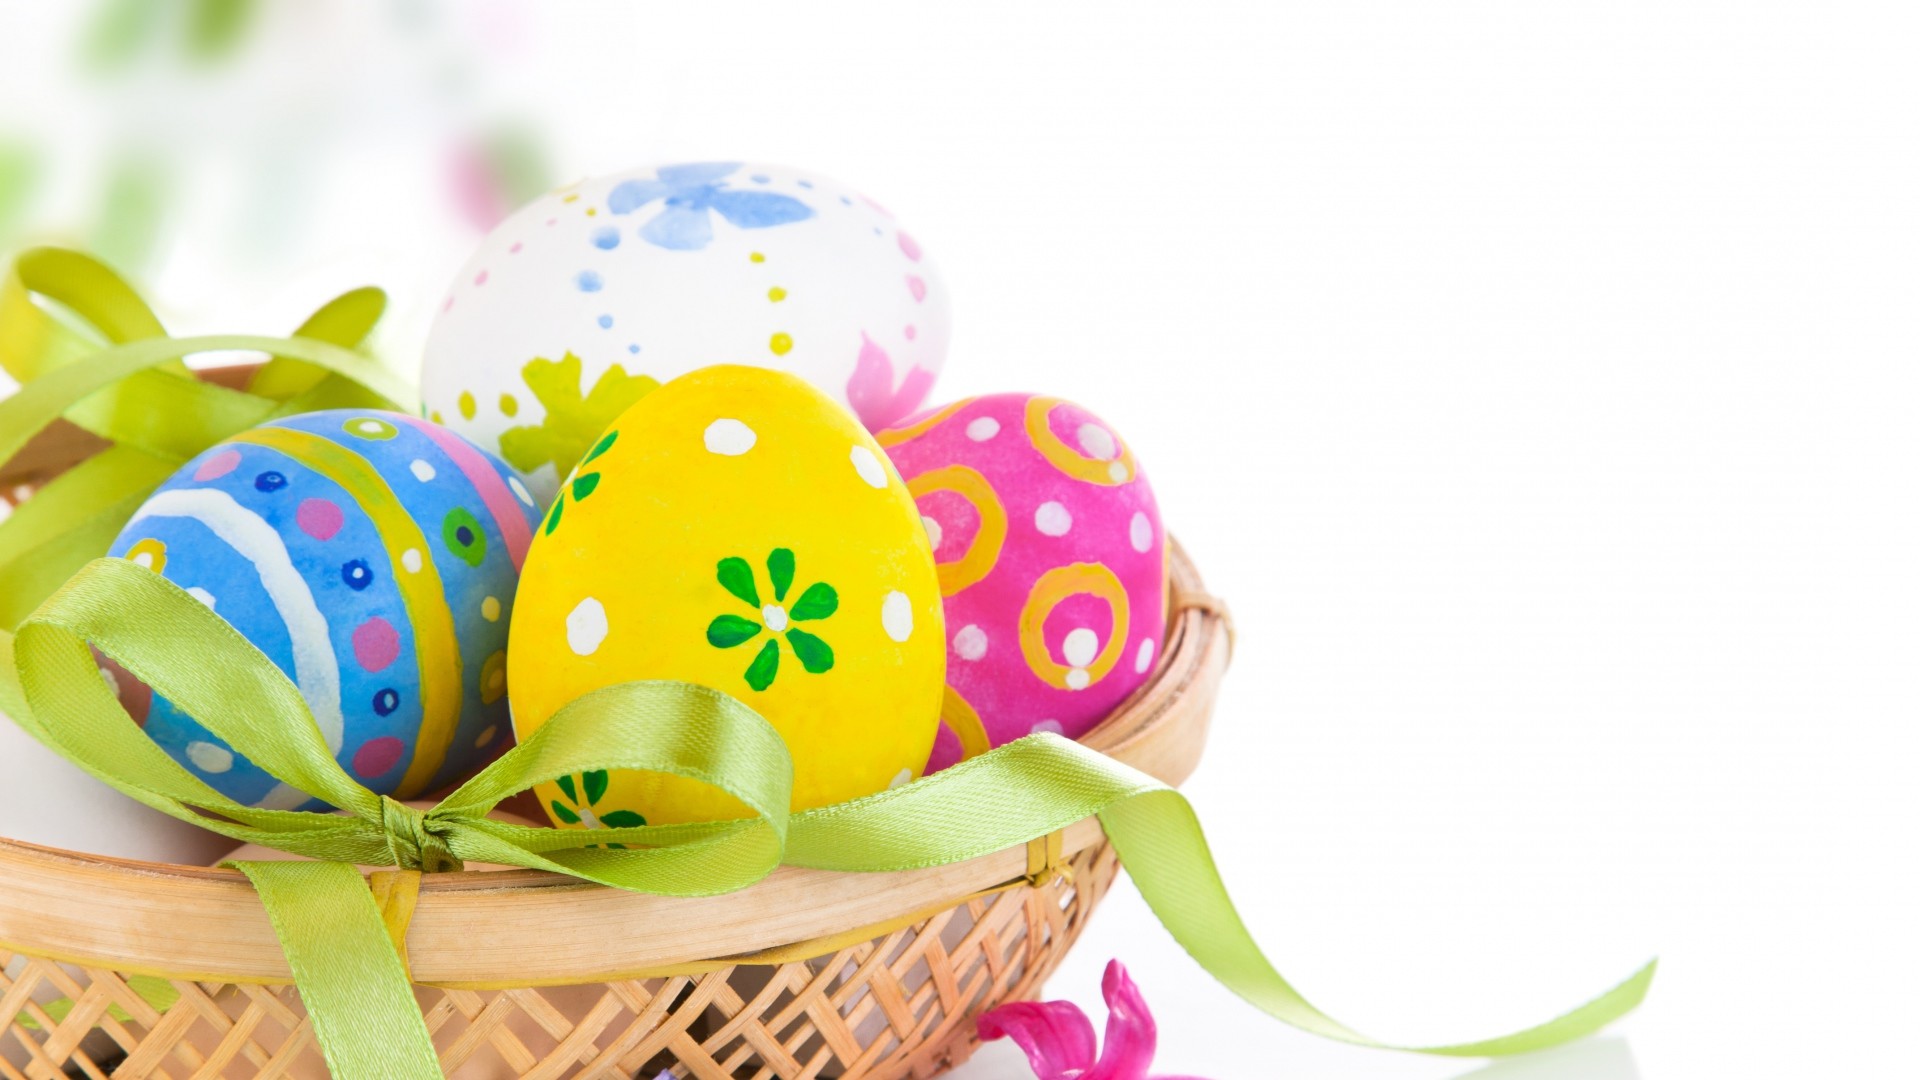 1920x1080, Get The Latest Flowers, Spring, Easter News, - Easter Egg Wall Paper - HD Wallpaper 